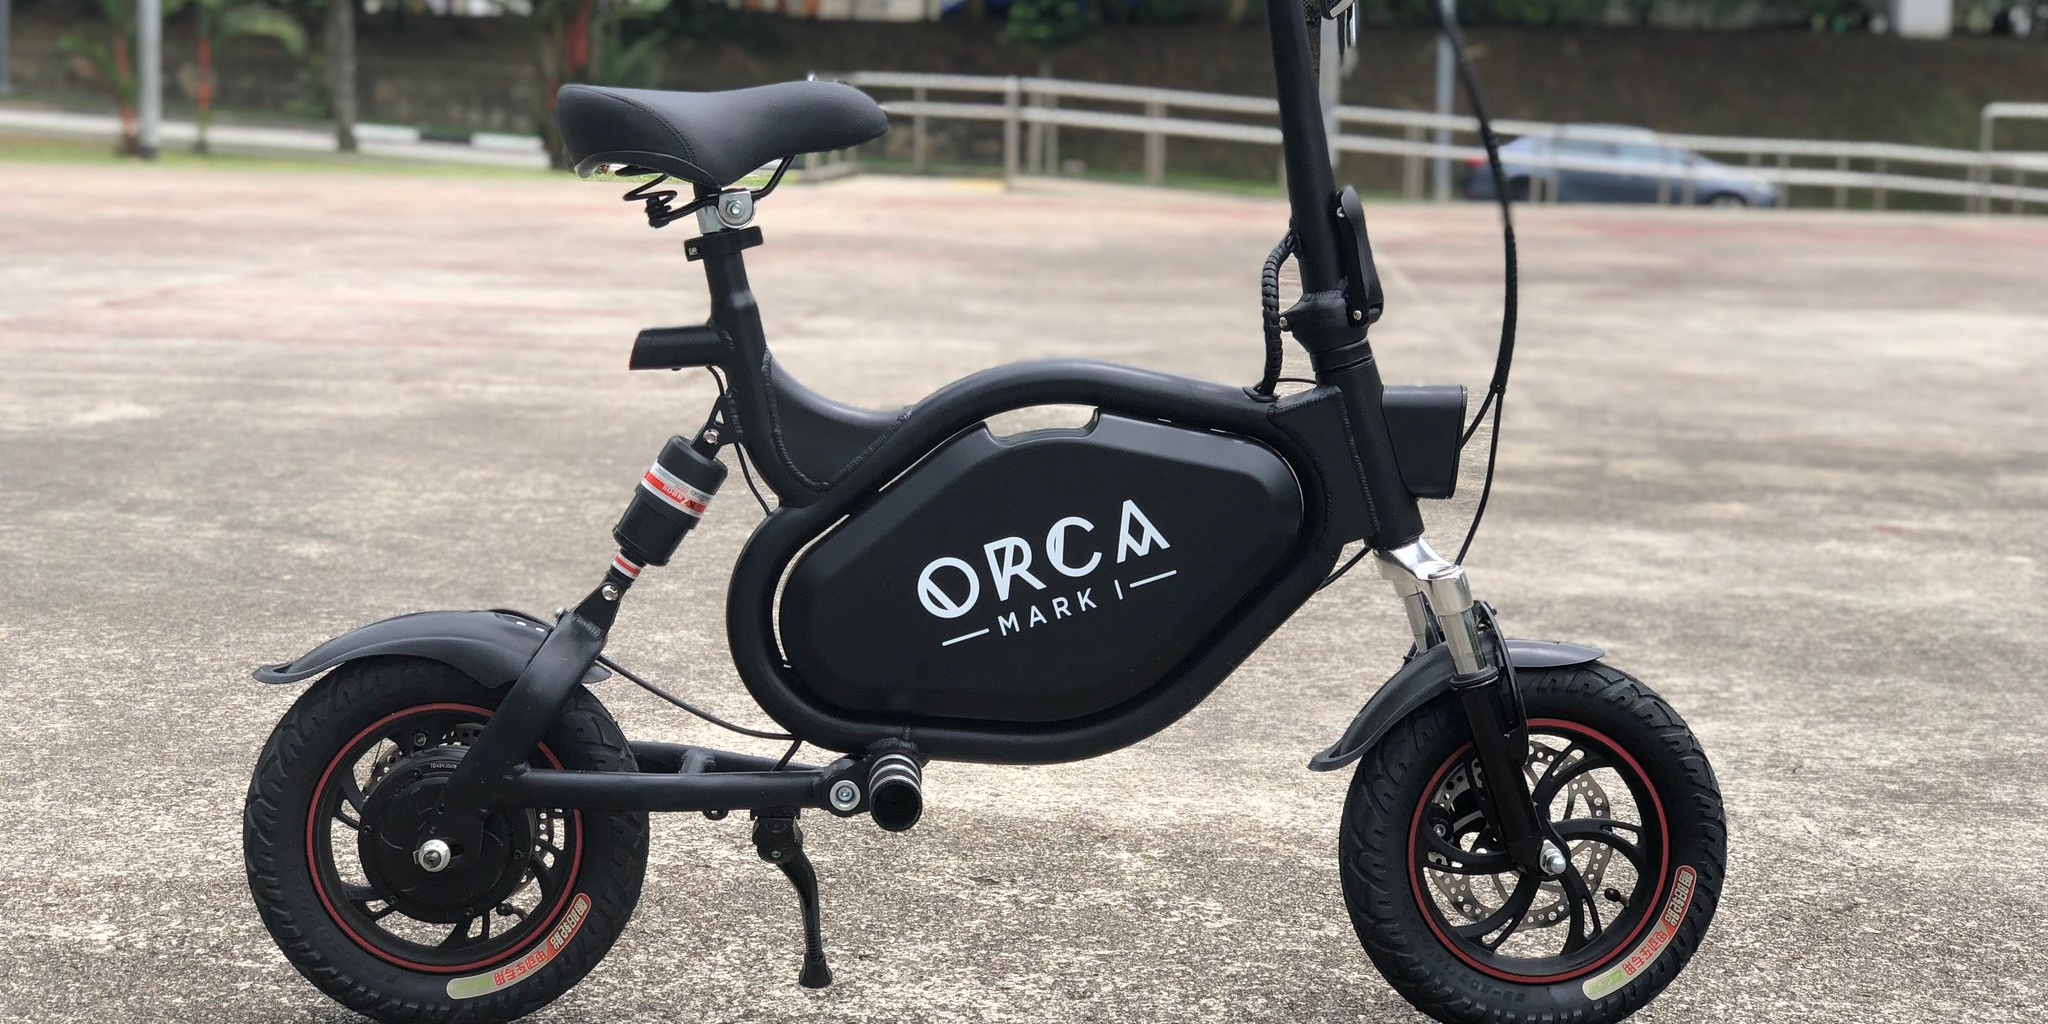 2018 best electric scooter